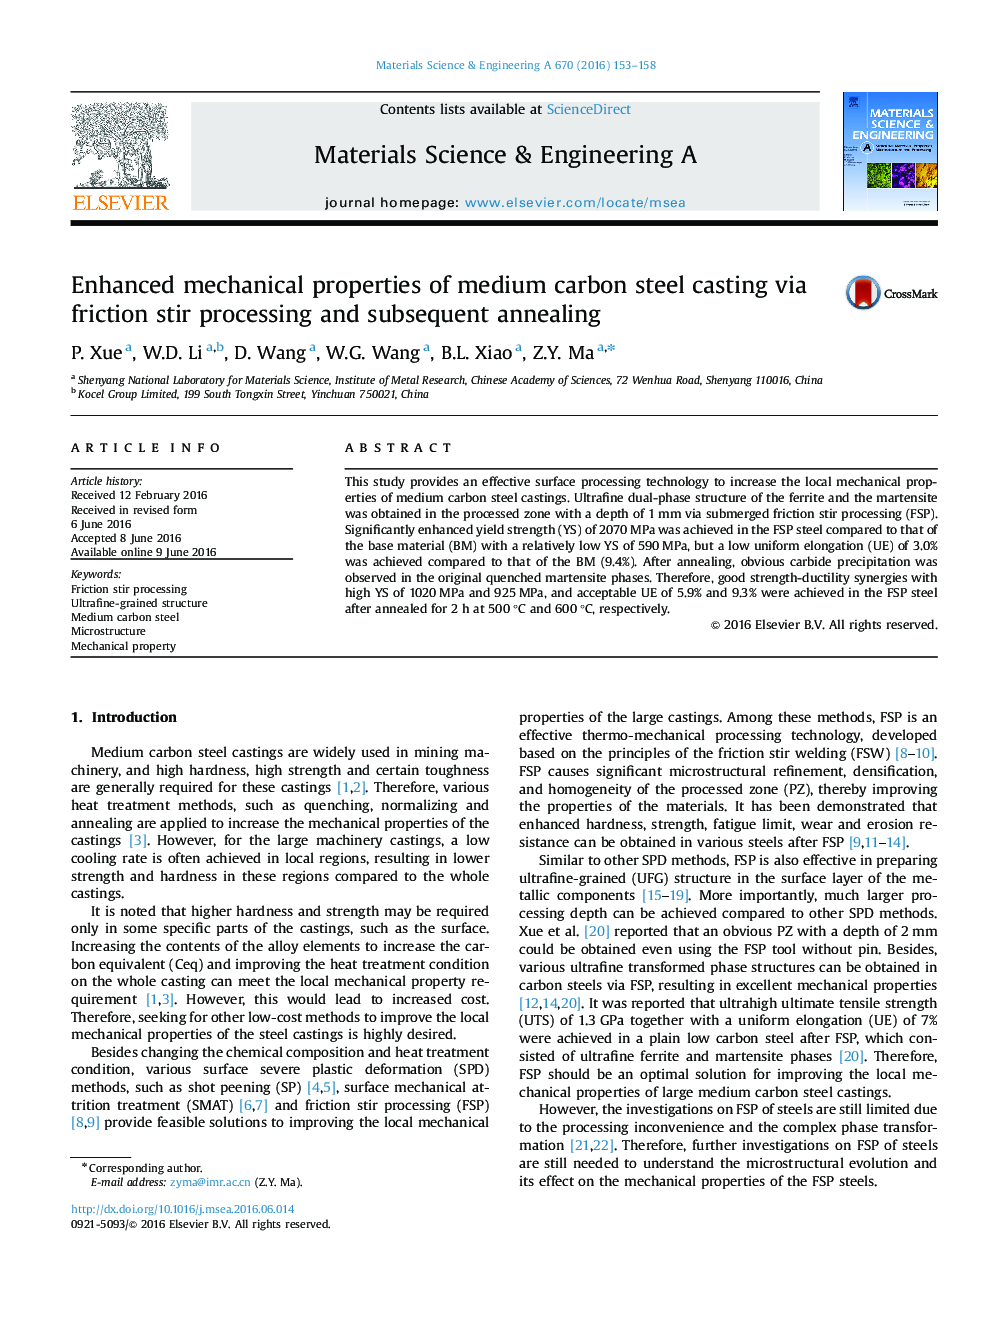 Enhanced mechanical properties of medium carbon steel casting via friction stir processing and subsequent annealing